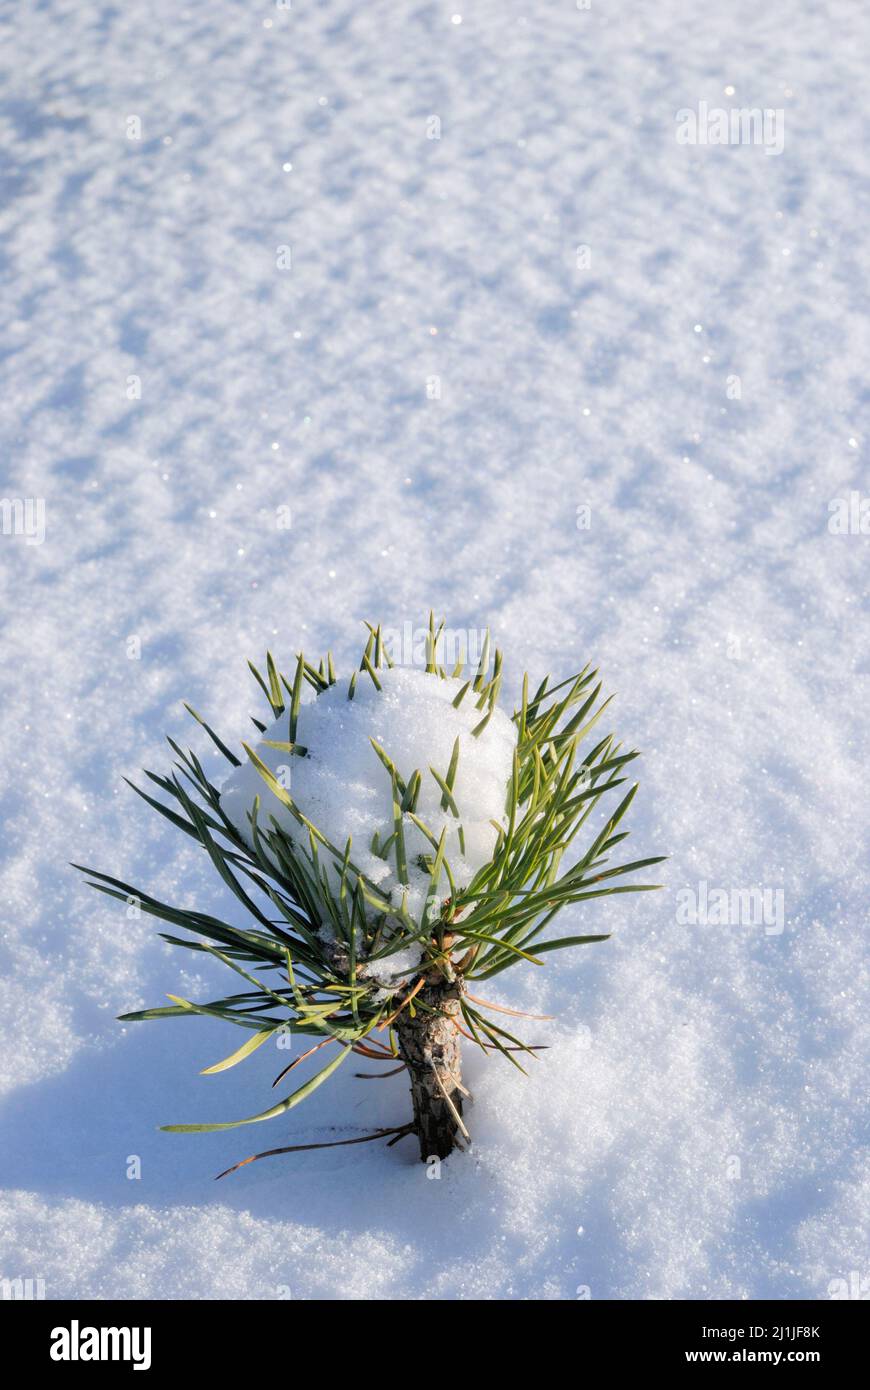 Scots pine (Pinus sylvestris) sapling in snow, cold sunny winter day. Stock Photo